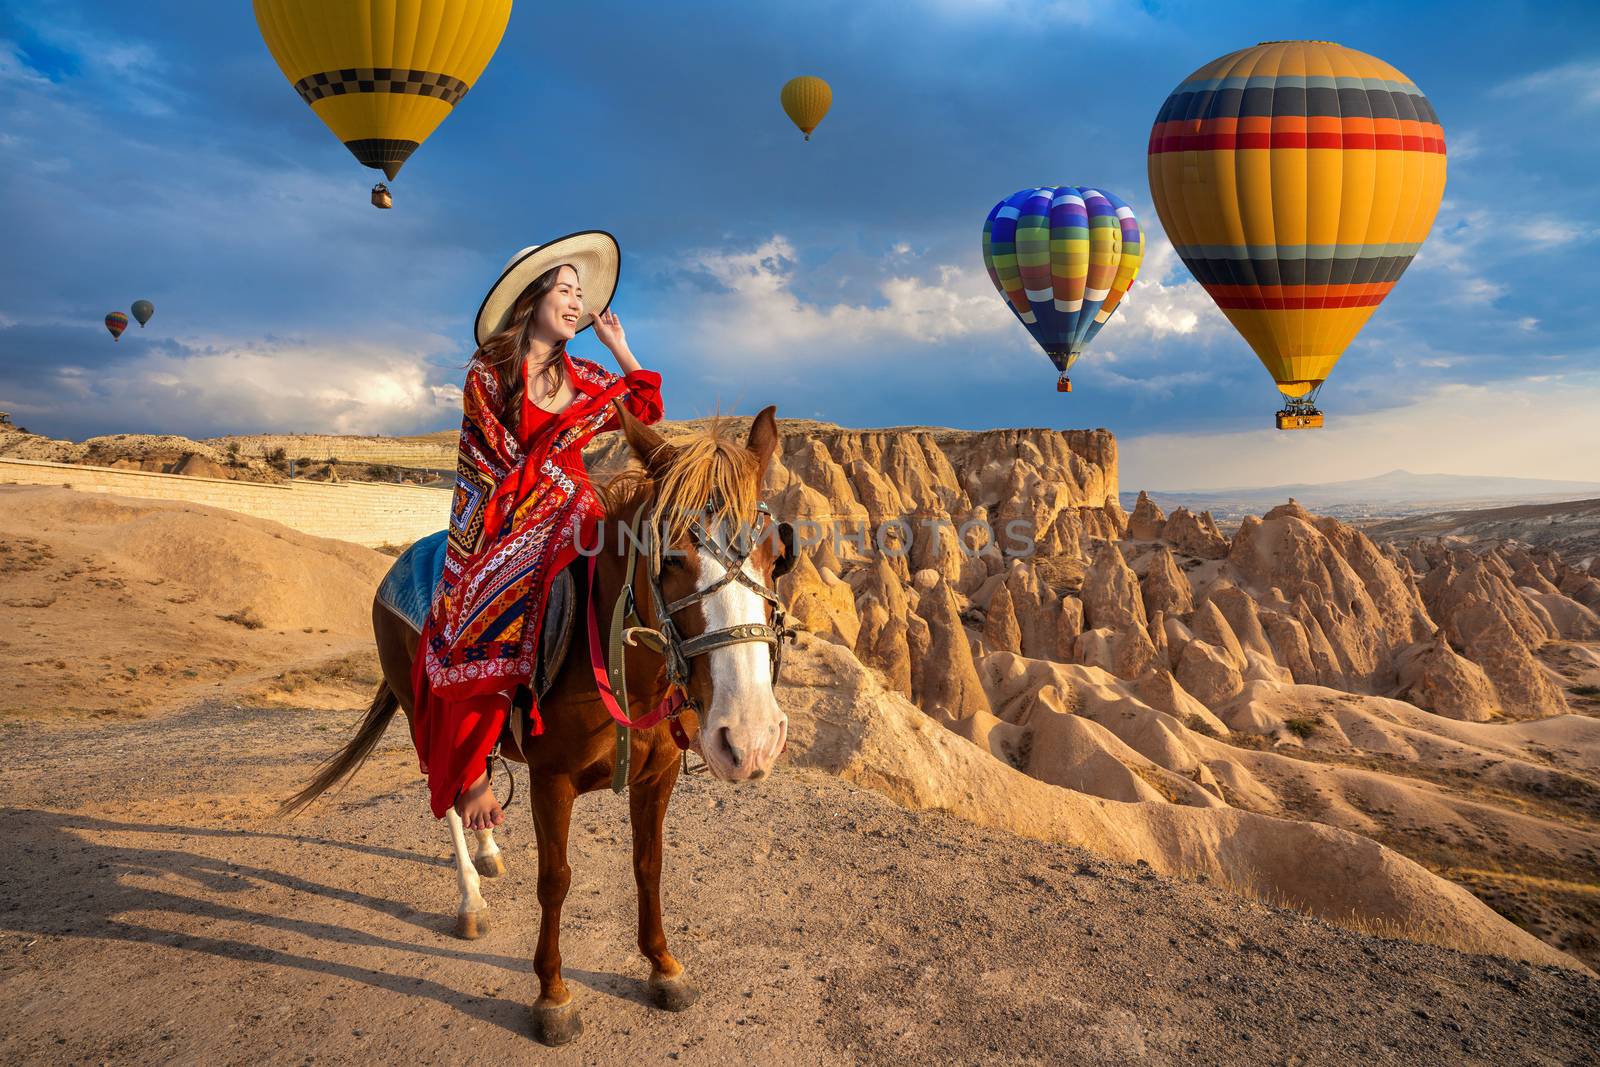 Tourists enjoy ride horses and looking to balloons in Cappadocia, Turkey